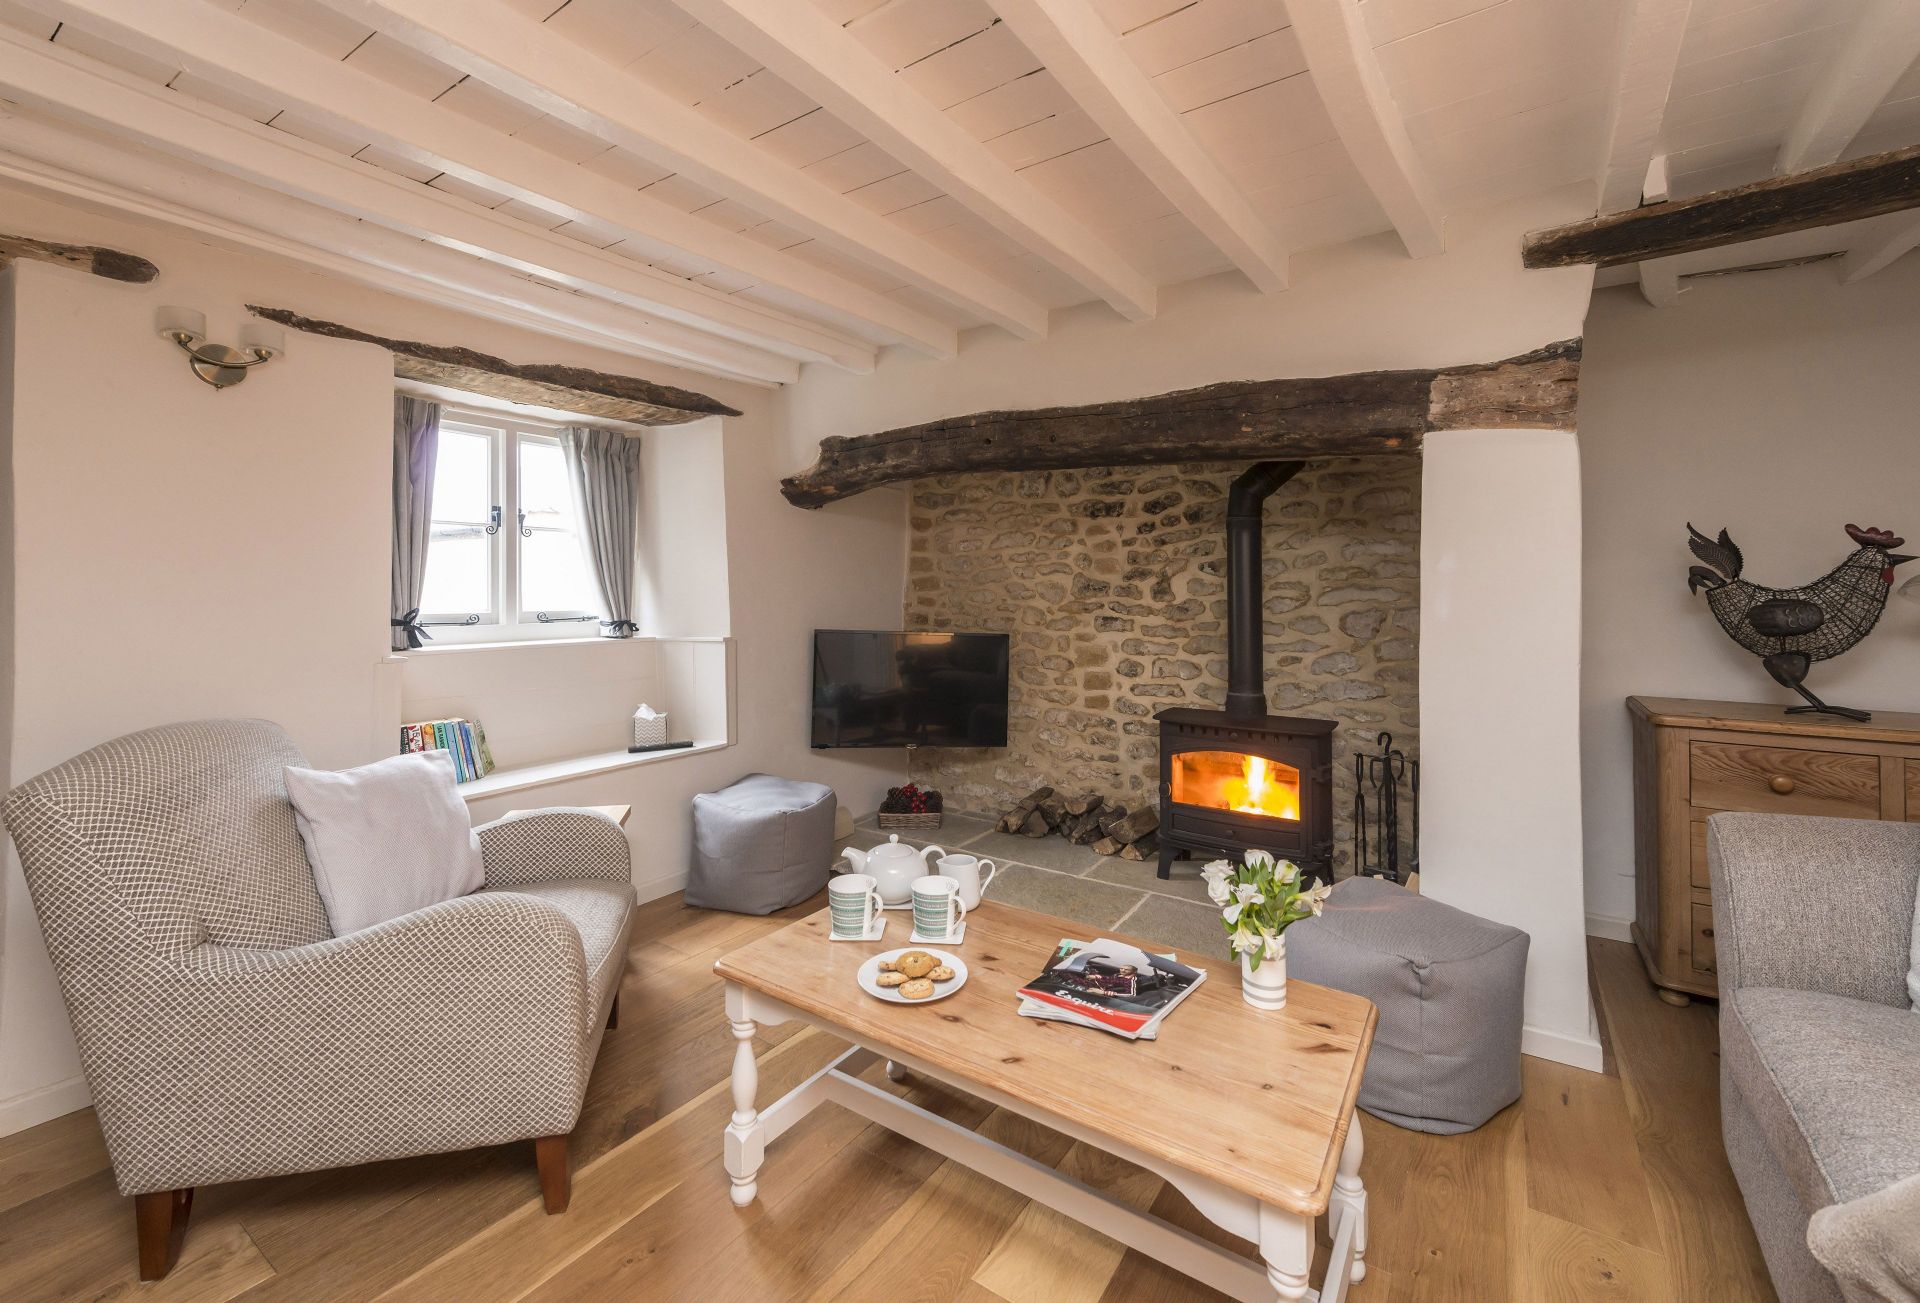 Vicarage Cottage is located in Bridport and surrounding villages